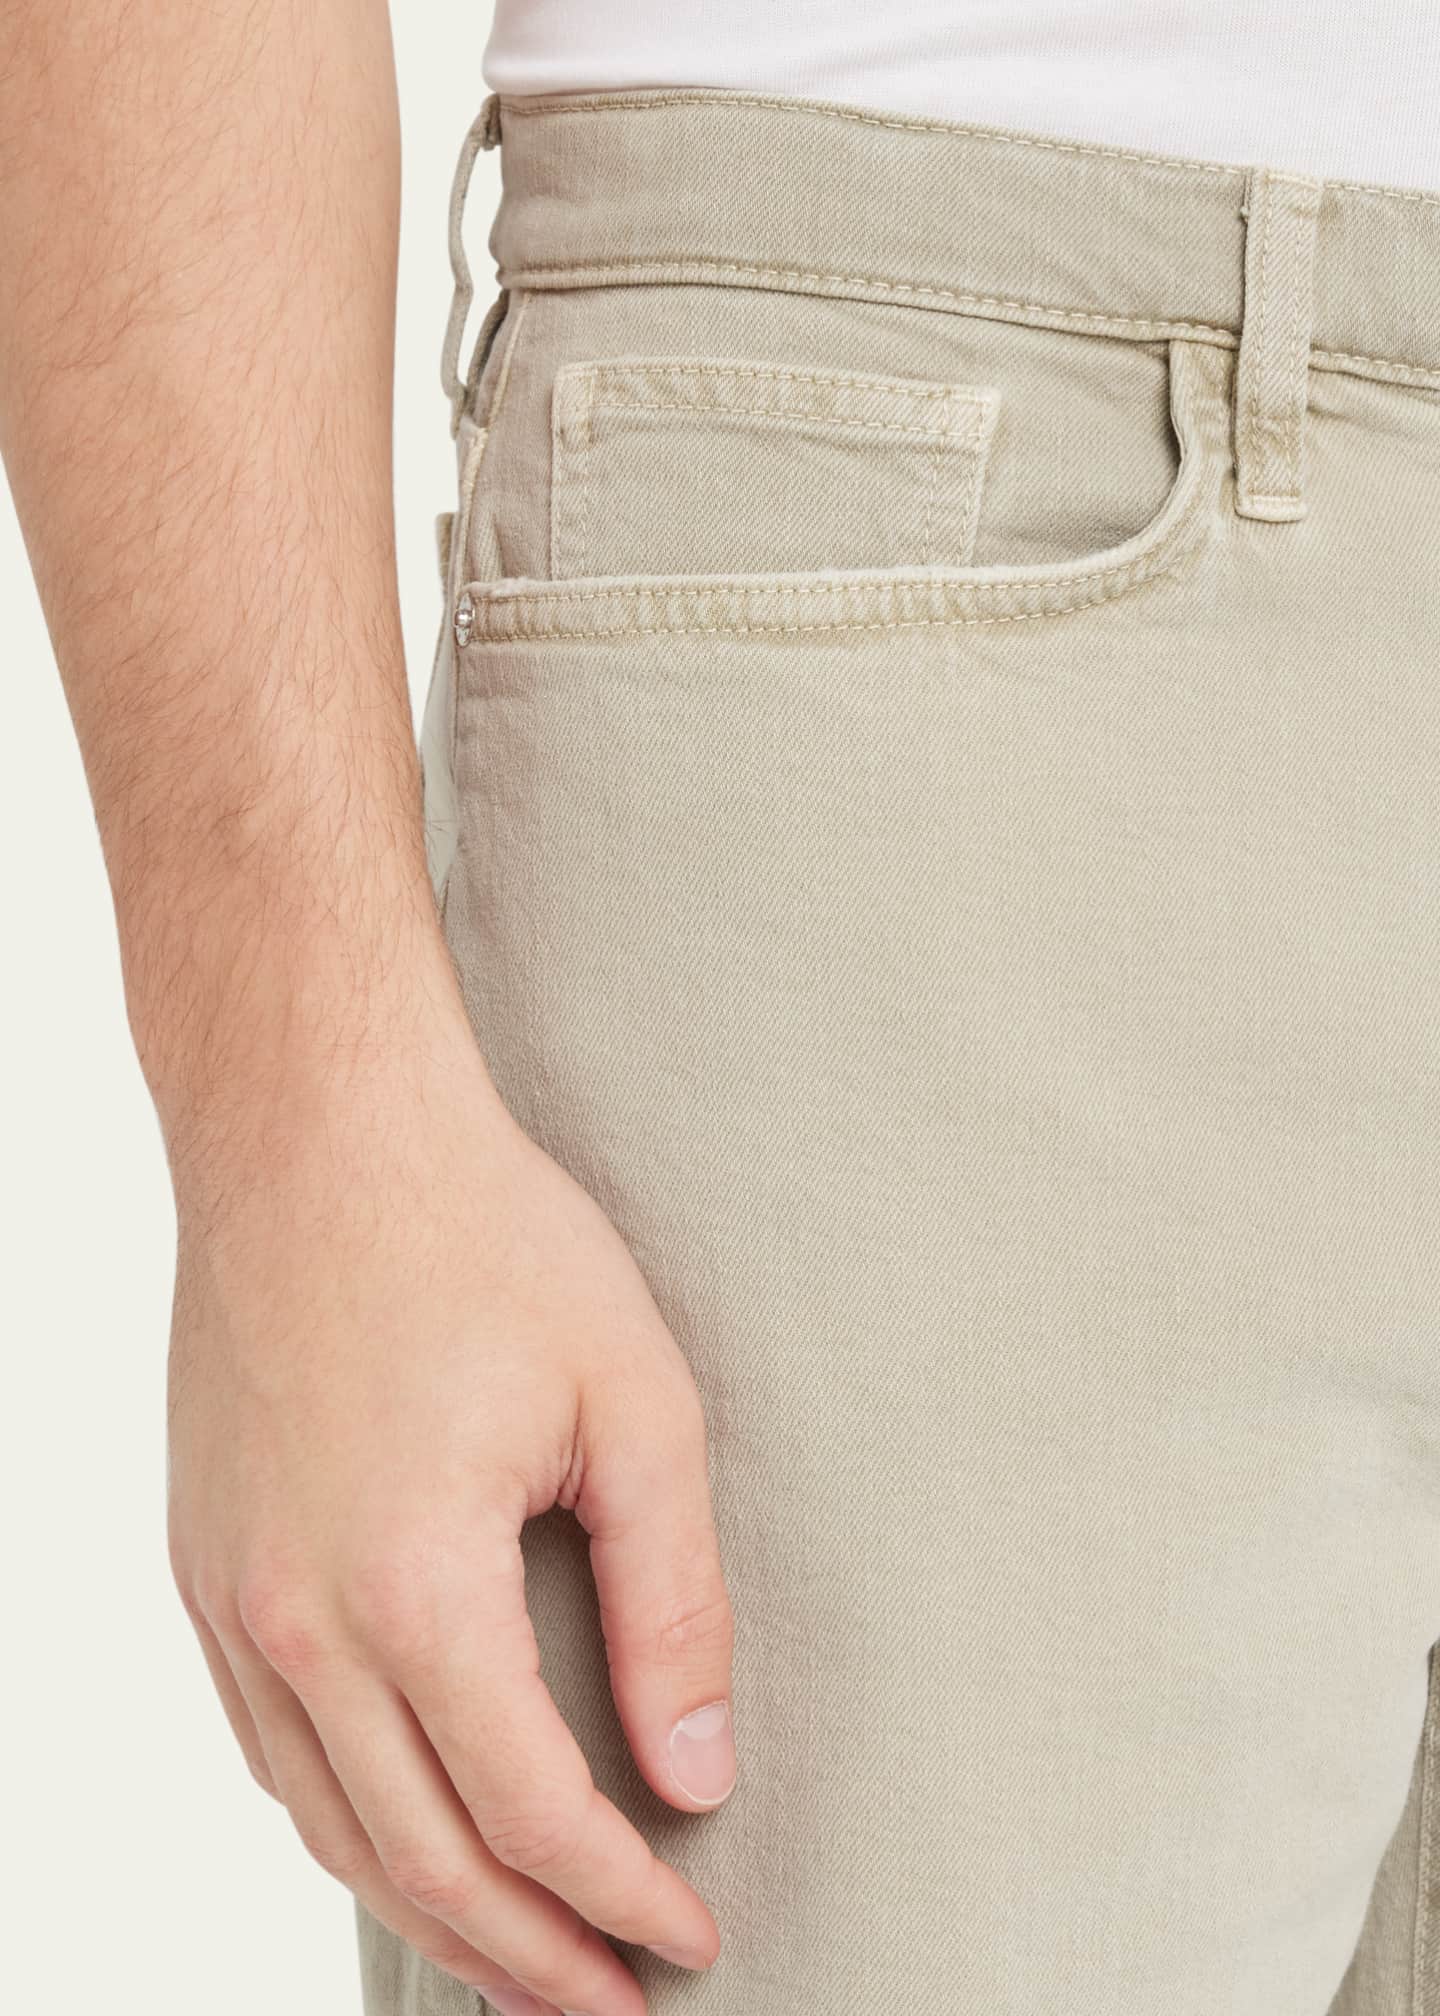 Shorts homme, shorts chinos homme, bermudas homme